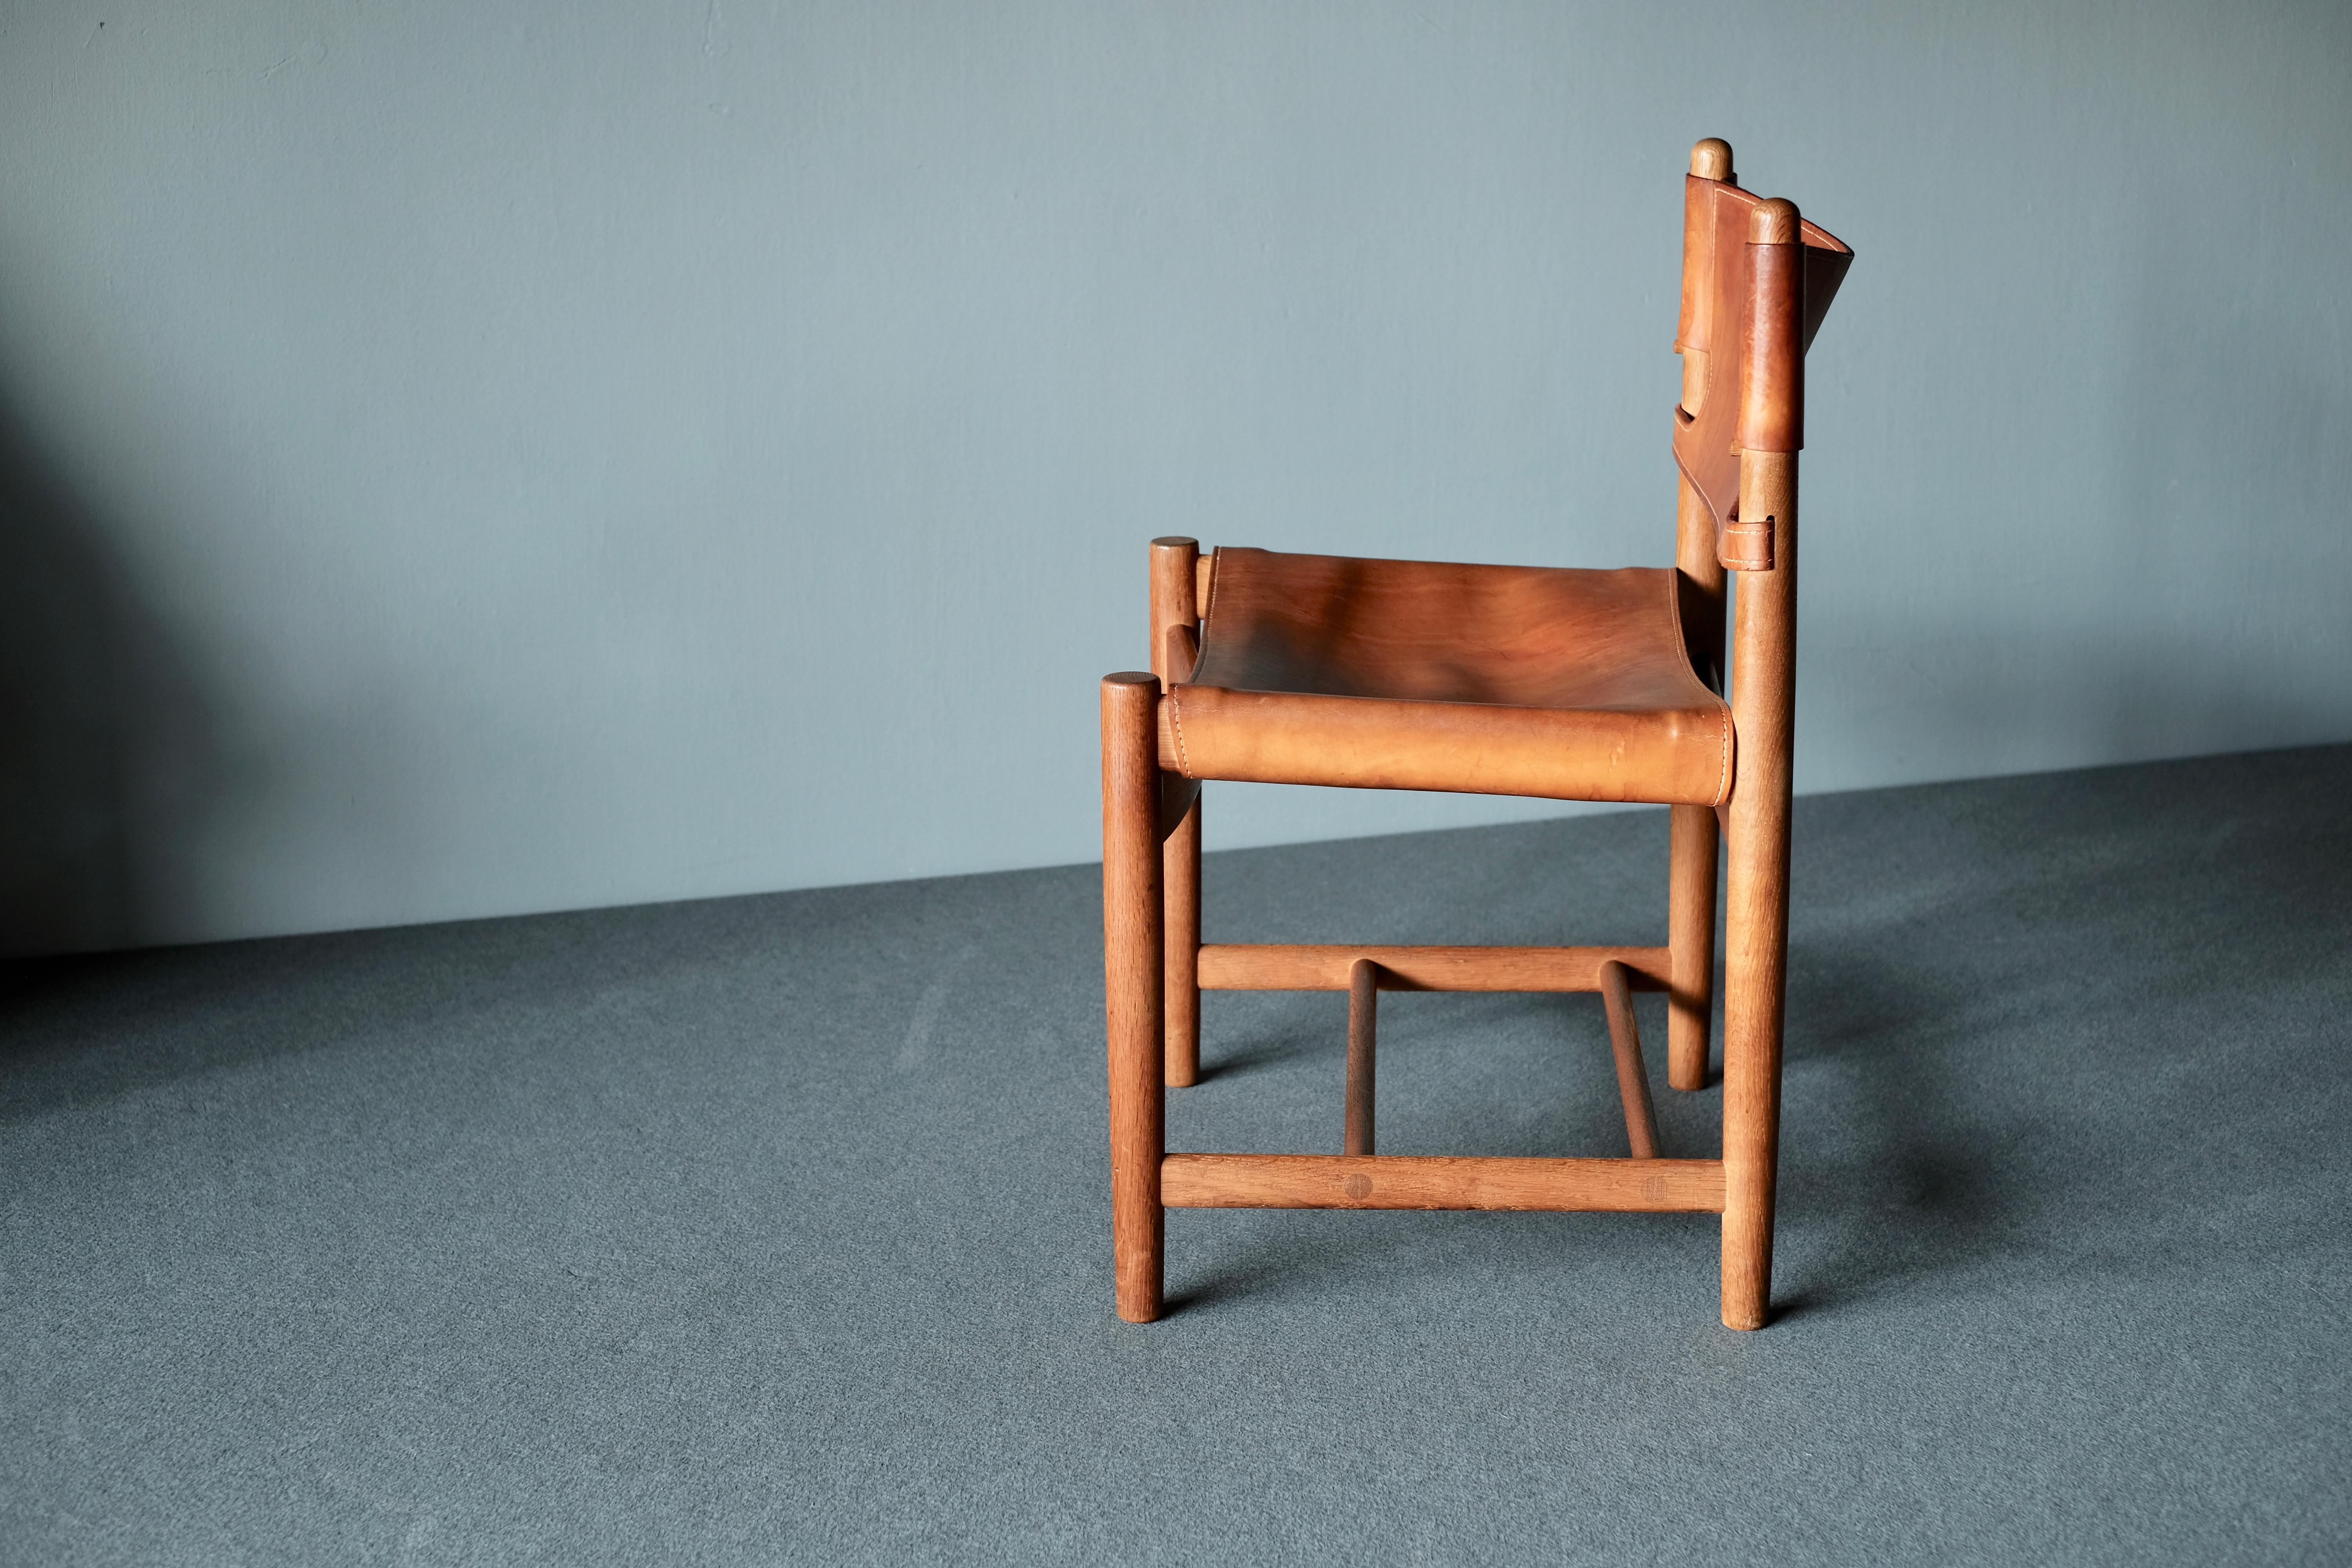 Chair by Borge Mogensen, manufactured by Fredericia. It has a solid oak frame and saddle leather seat and backrest. In order to give more comfortable back support the leather at the top of the backrest is cut so it curves slightly at the top. The